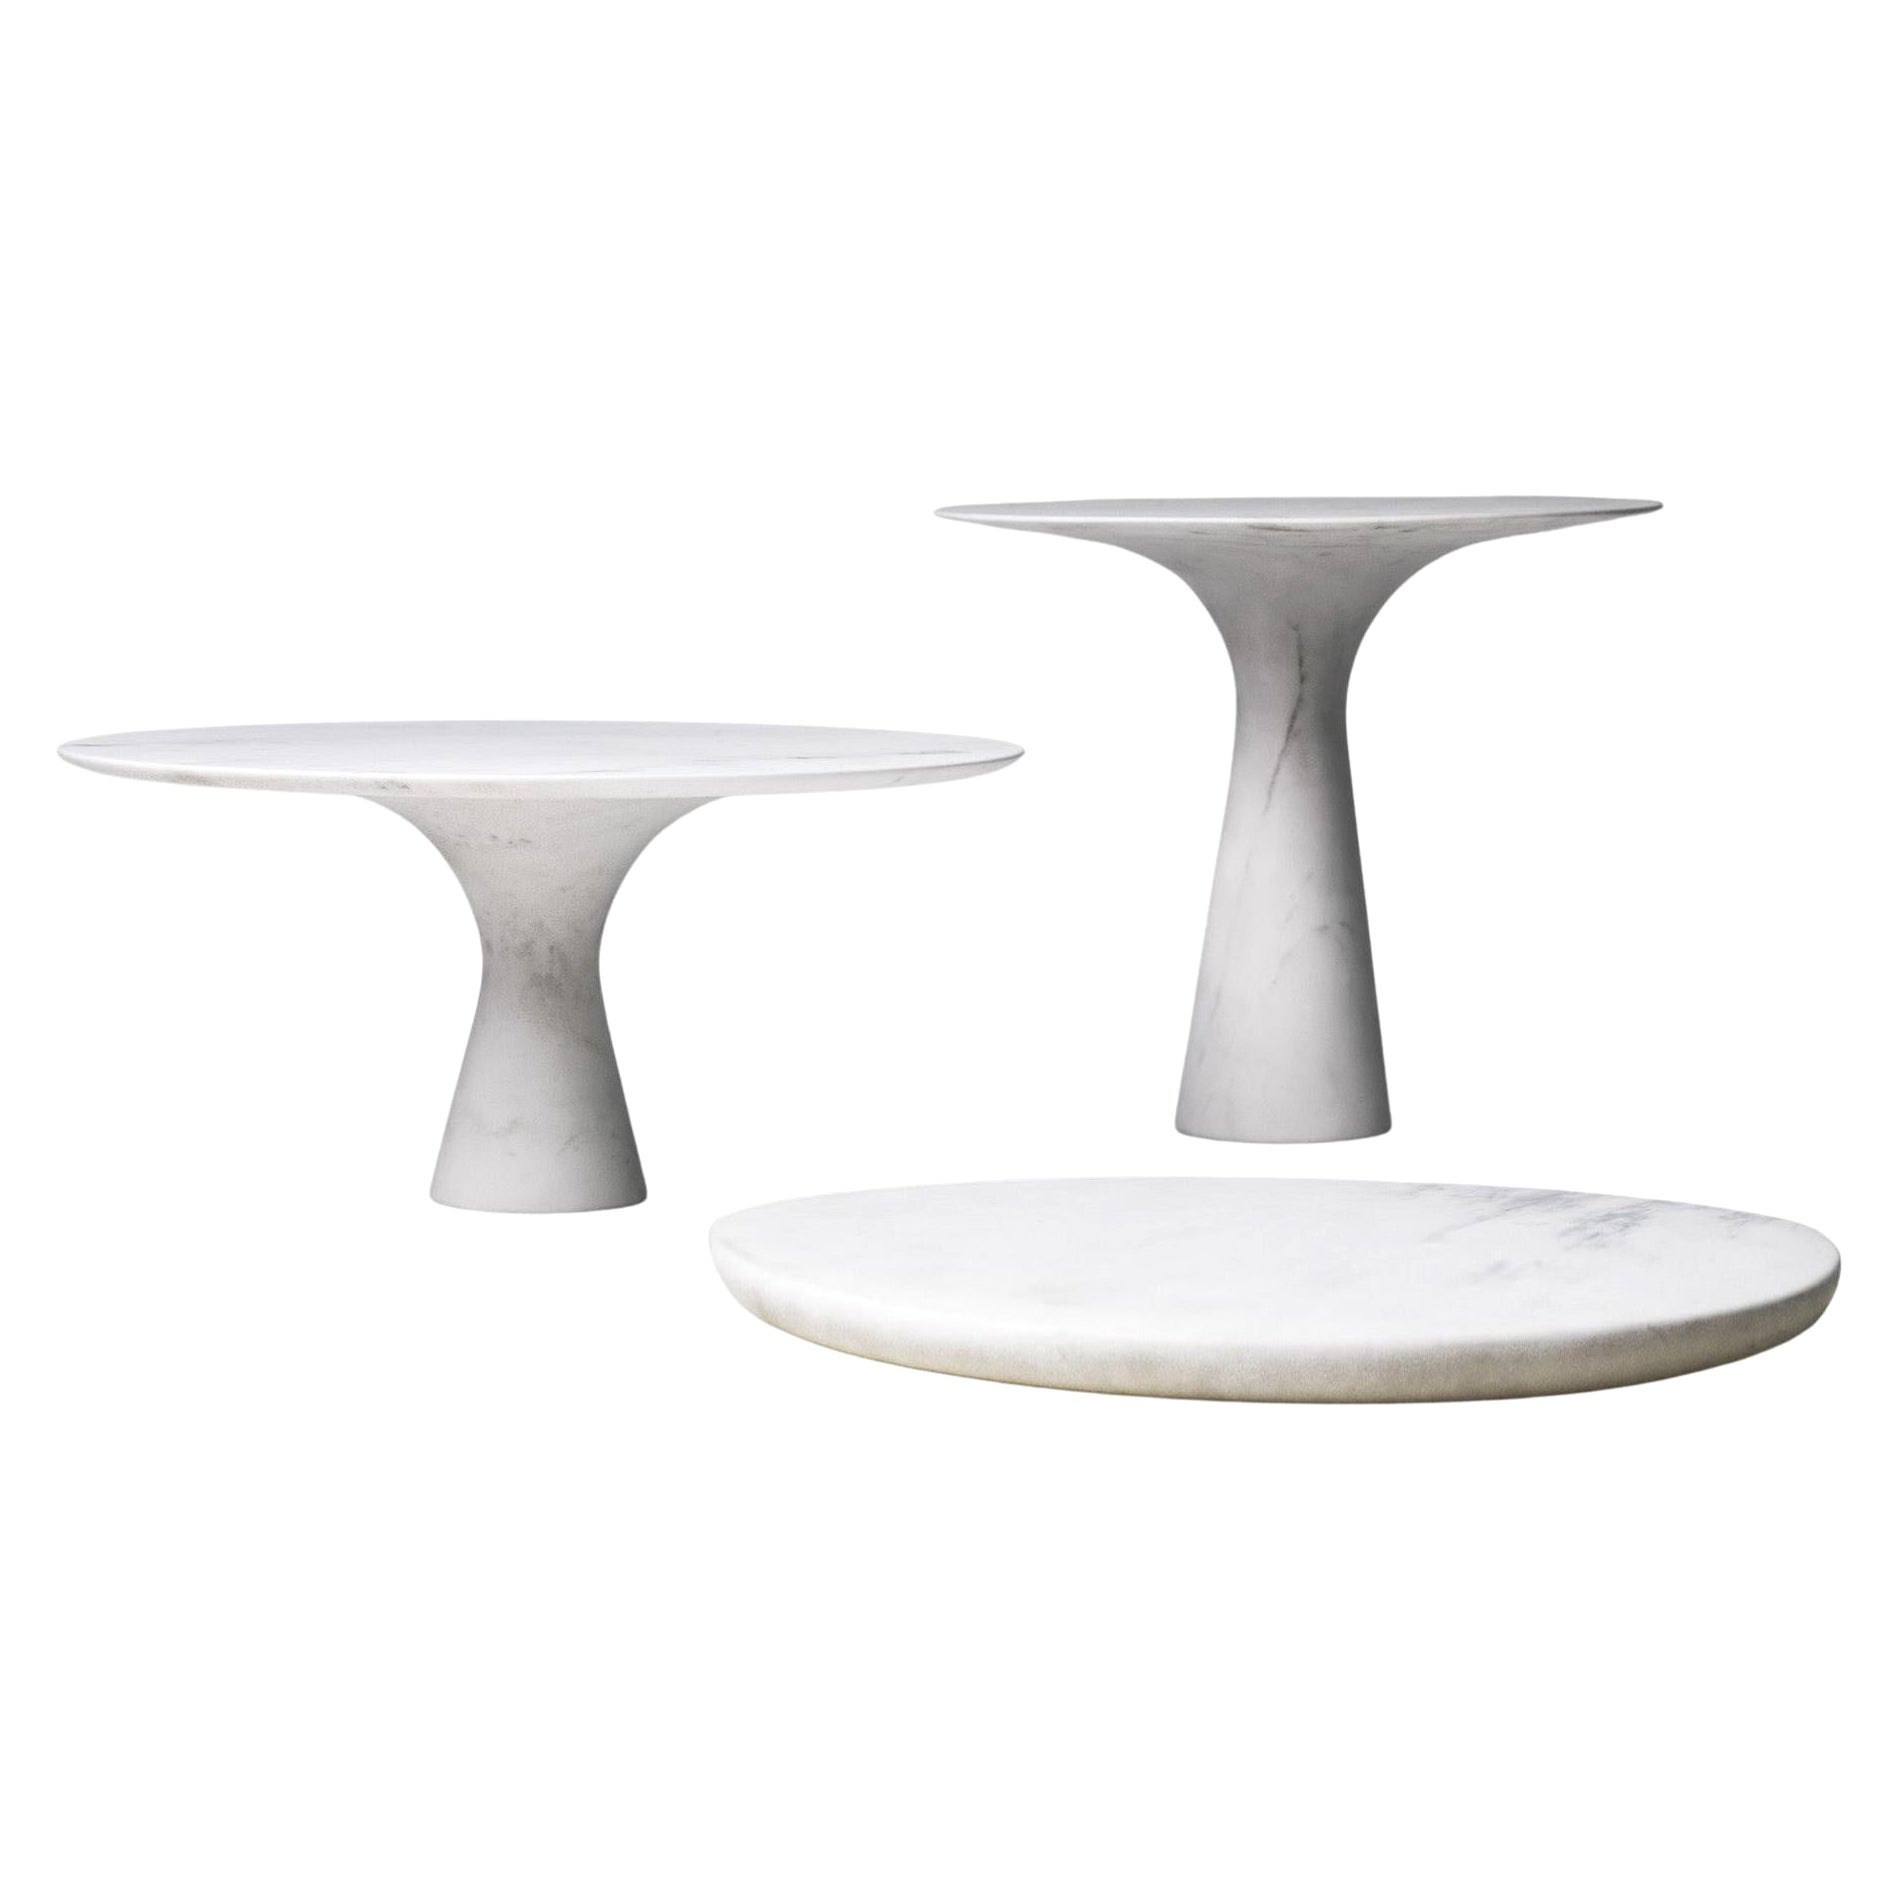 Set of 3 Refined Contemporary Marble Kynos Cake Stands and Plate